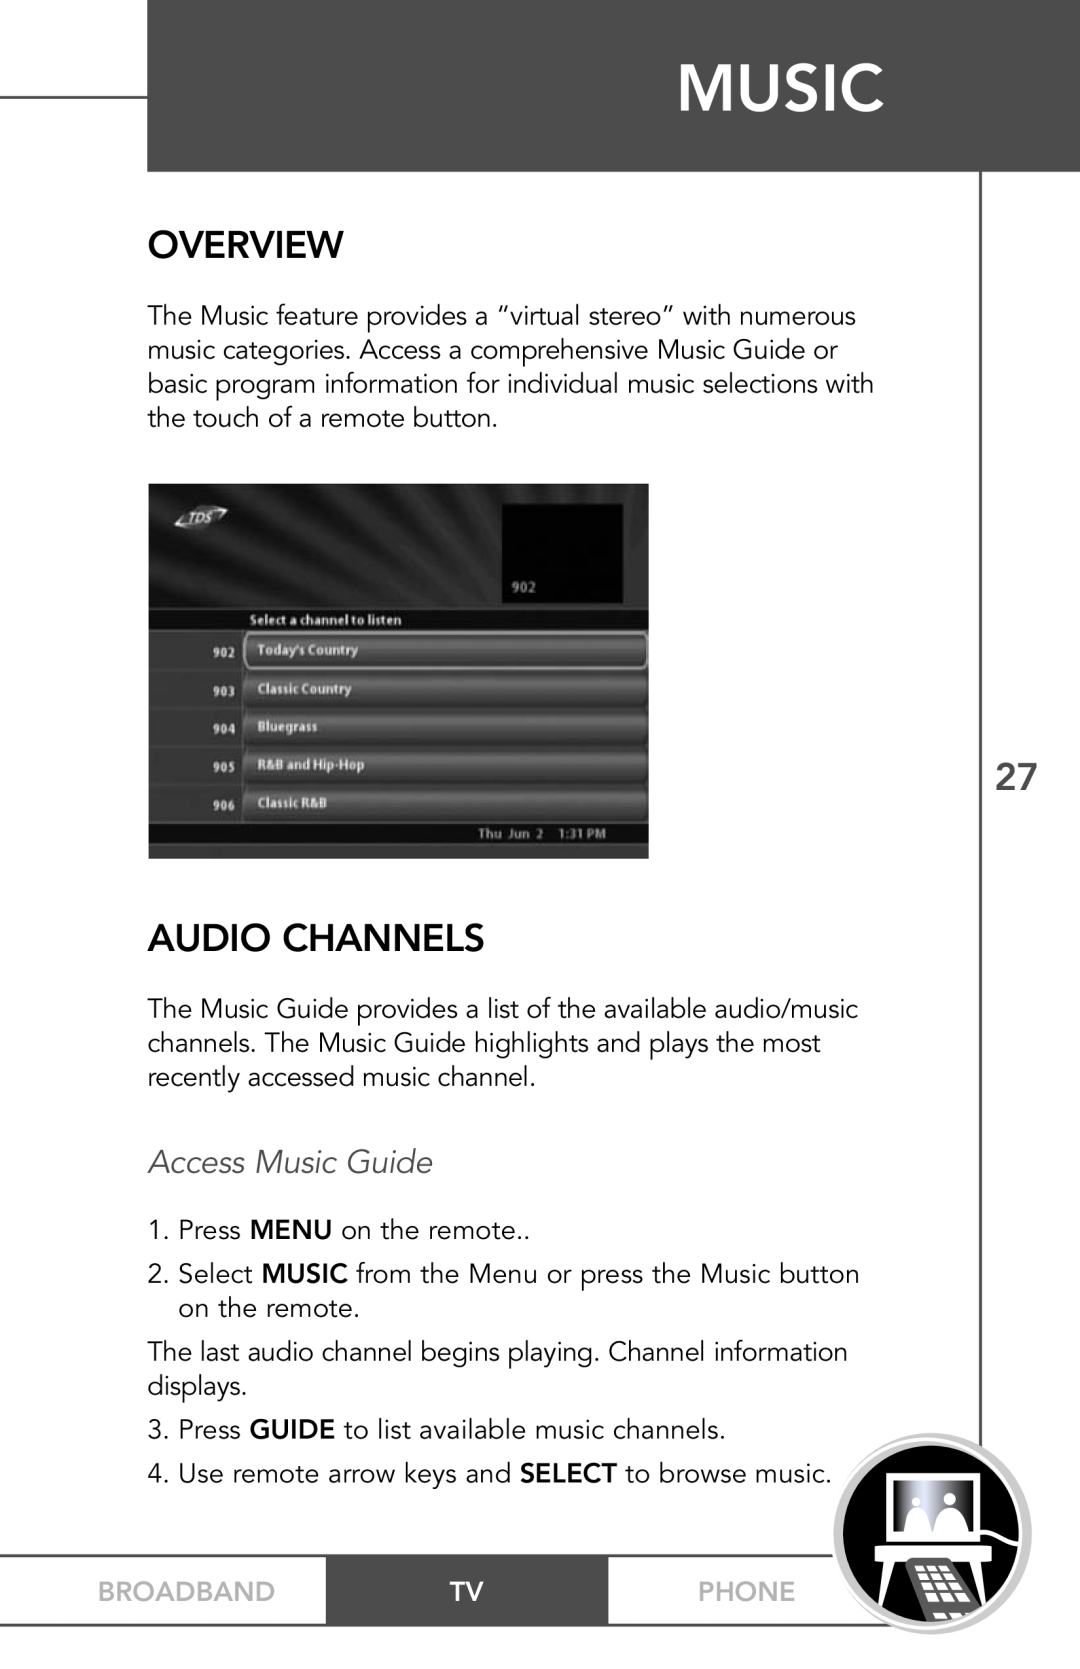 TV Guide On Screen PHONEBROADBAND TV manual Audio Channels, Access Music Guide, Overview, Broadband, Phone 